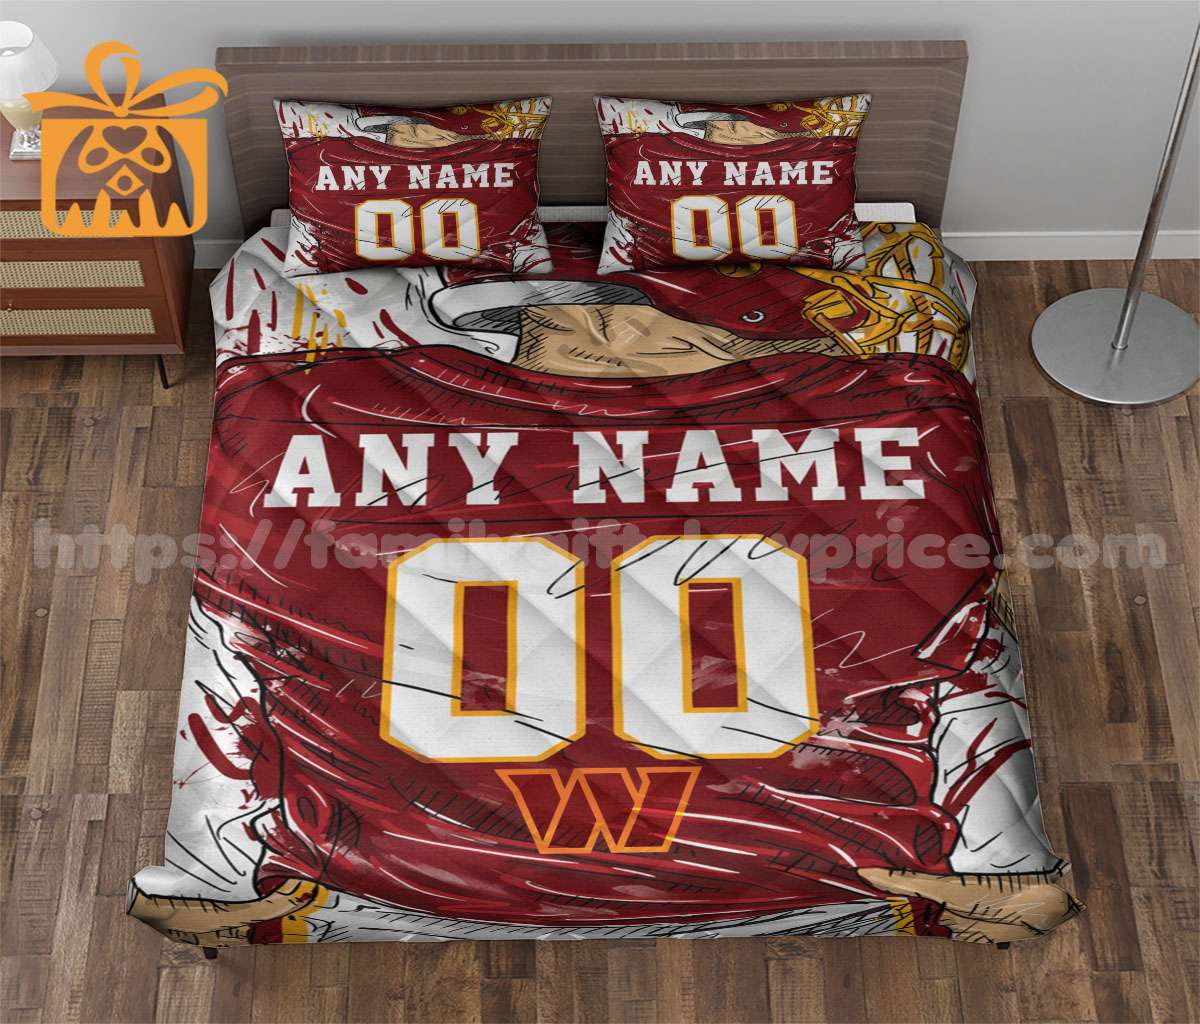 Washington Commanders Jerseys Quilt Bedding Sets, Washington Commanders Gifts, Personalized NFL Jerseys with Your Name & Number